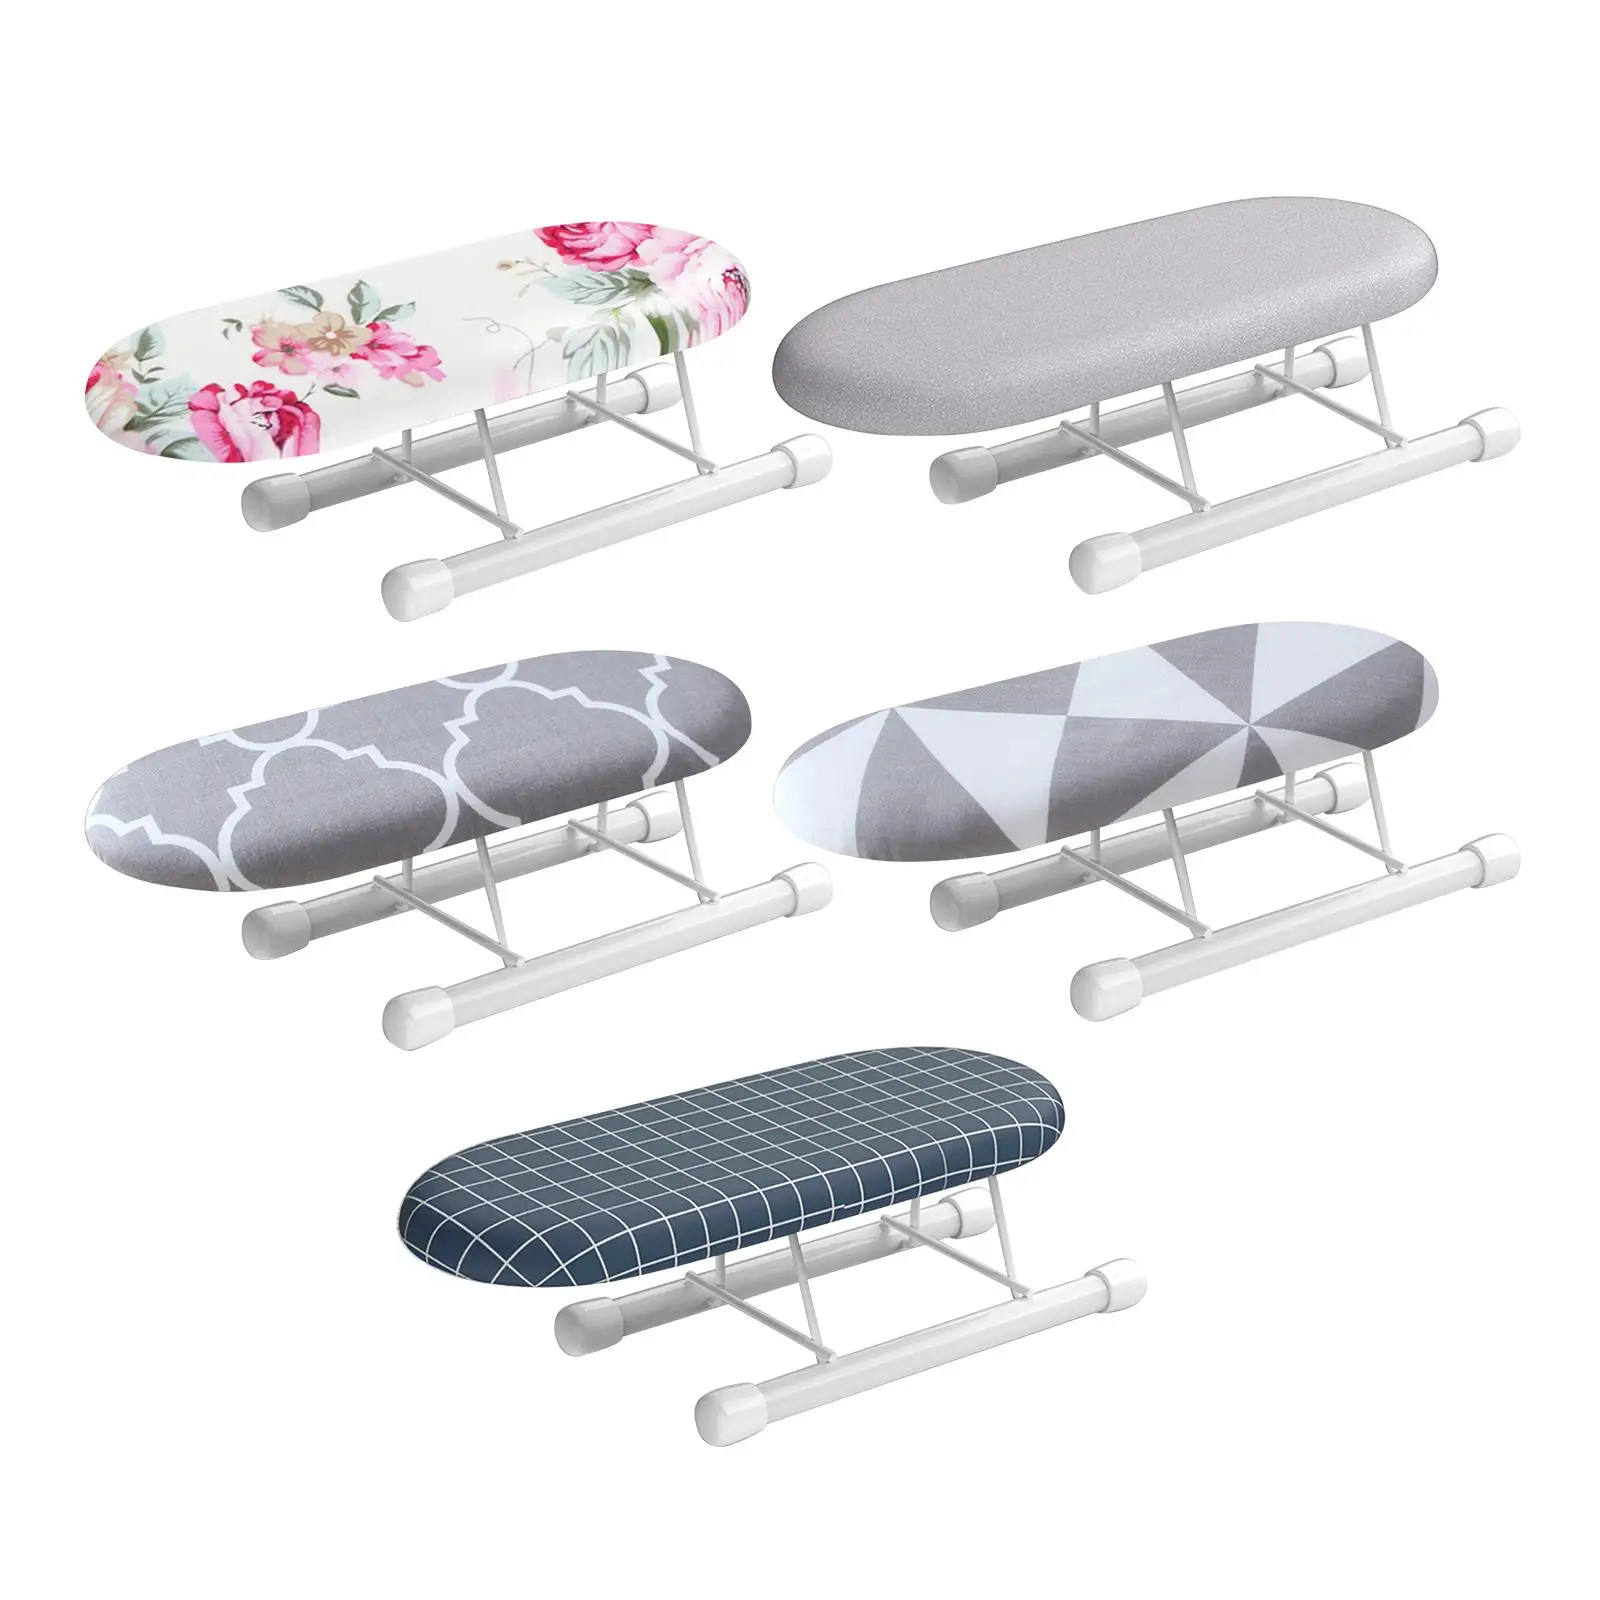 Portable Folding Ironing Board with Folding Legs Ironing Cuffs Neckline Removable Cover for Home Apartments Home